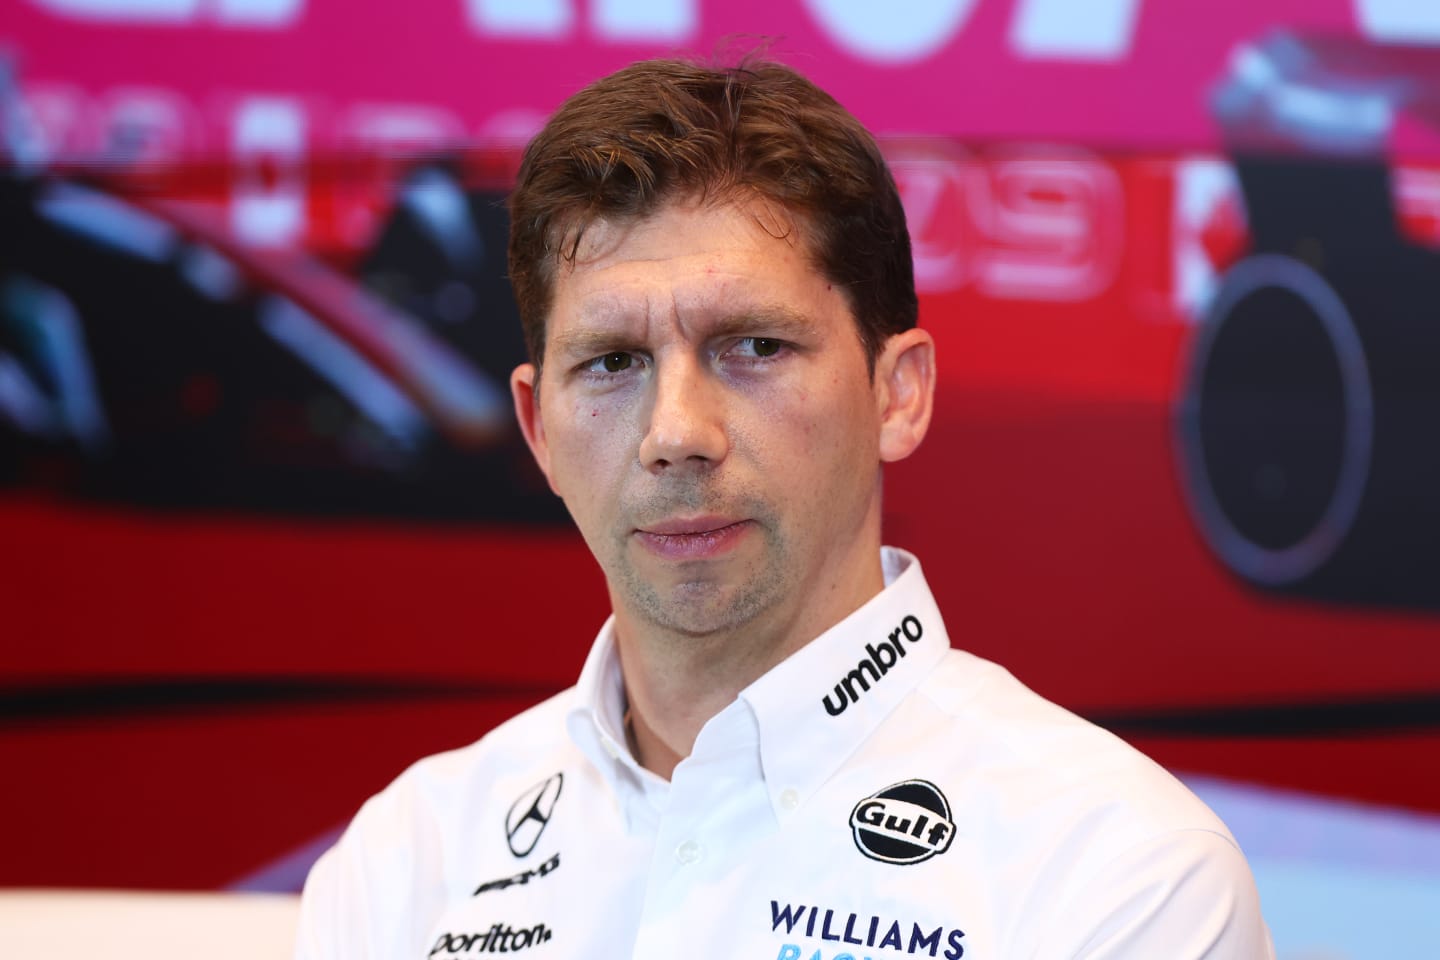 MONTREAL, QUEBEC - JUNE 16: James Vowles, Team Principal of Williams attends the Team Principals Press Conference during practice ahead of the F1 Grand Prix of Canada at Circuit Gilles Villeneuve on June 16, 2023 in Montreal, Quebec. (Photo by Dan Istitene/Getty Images)